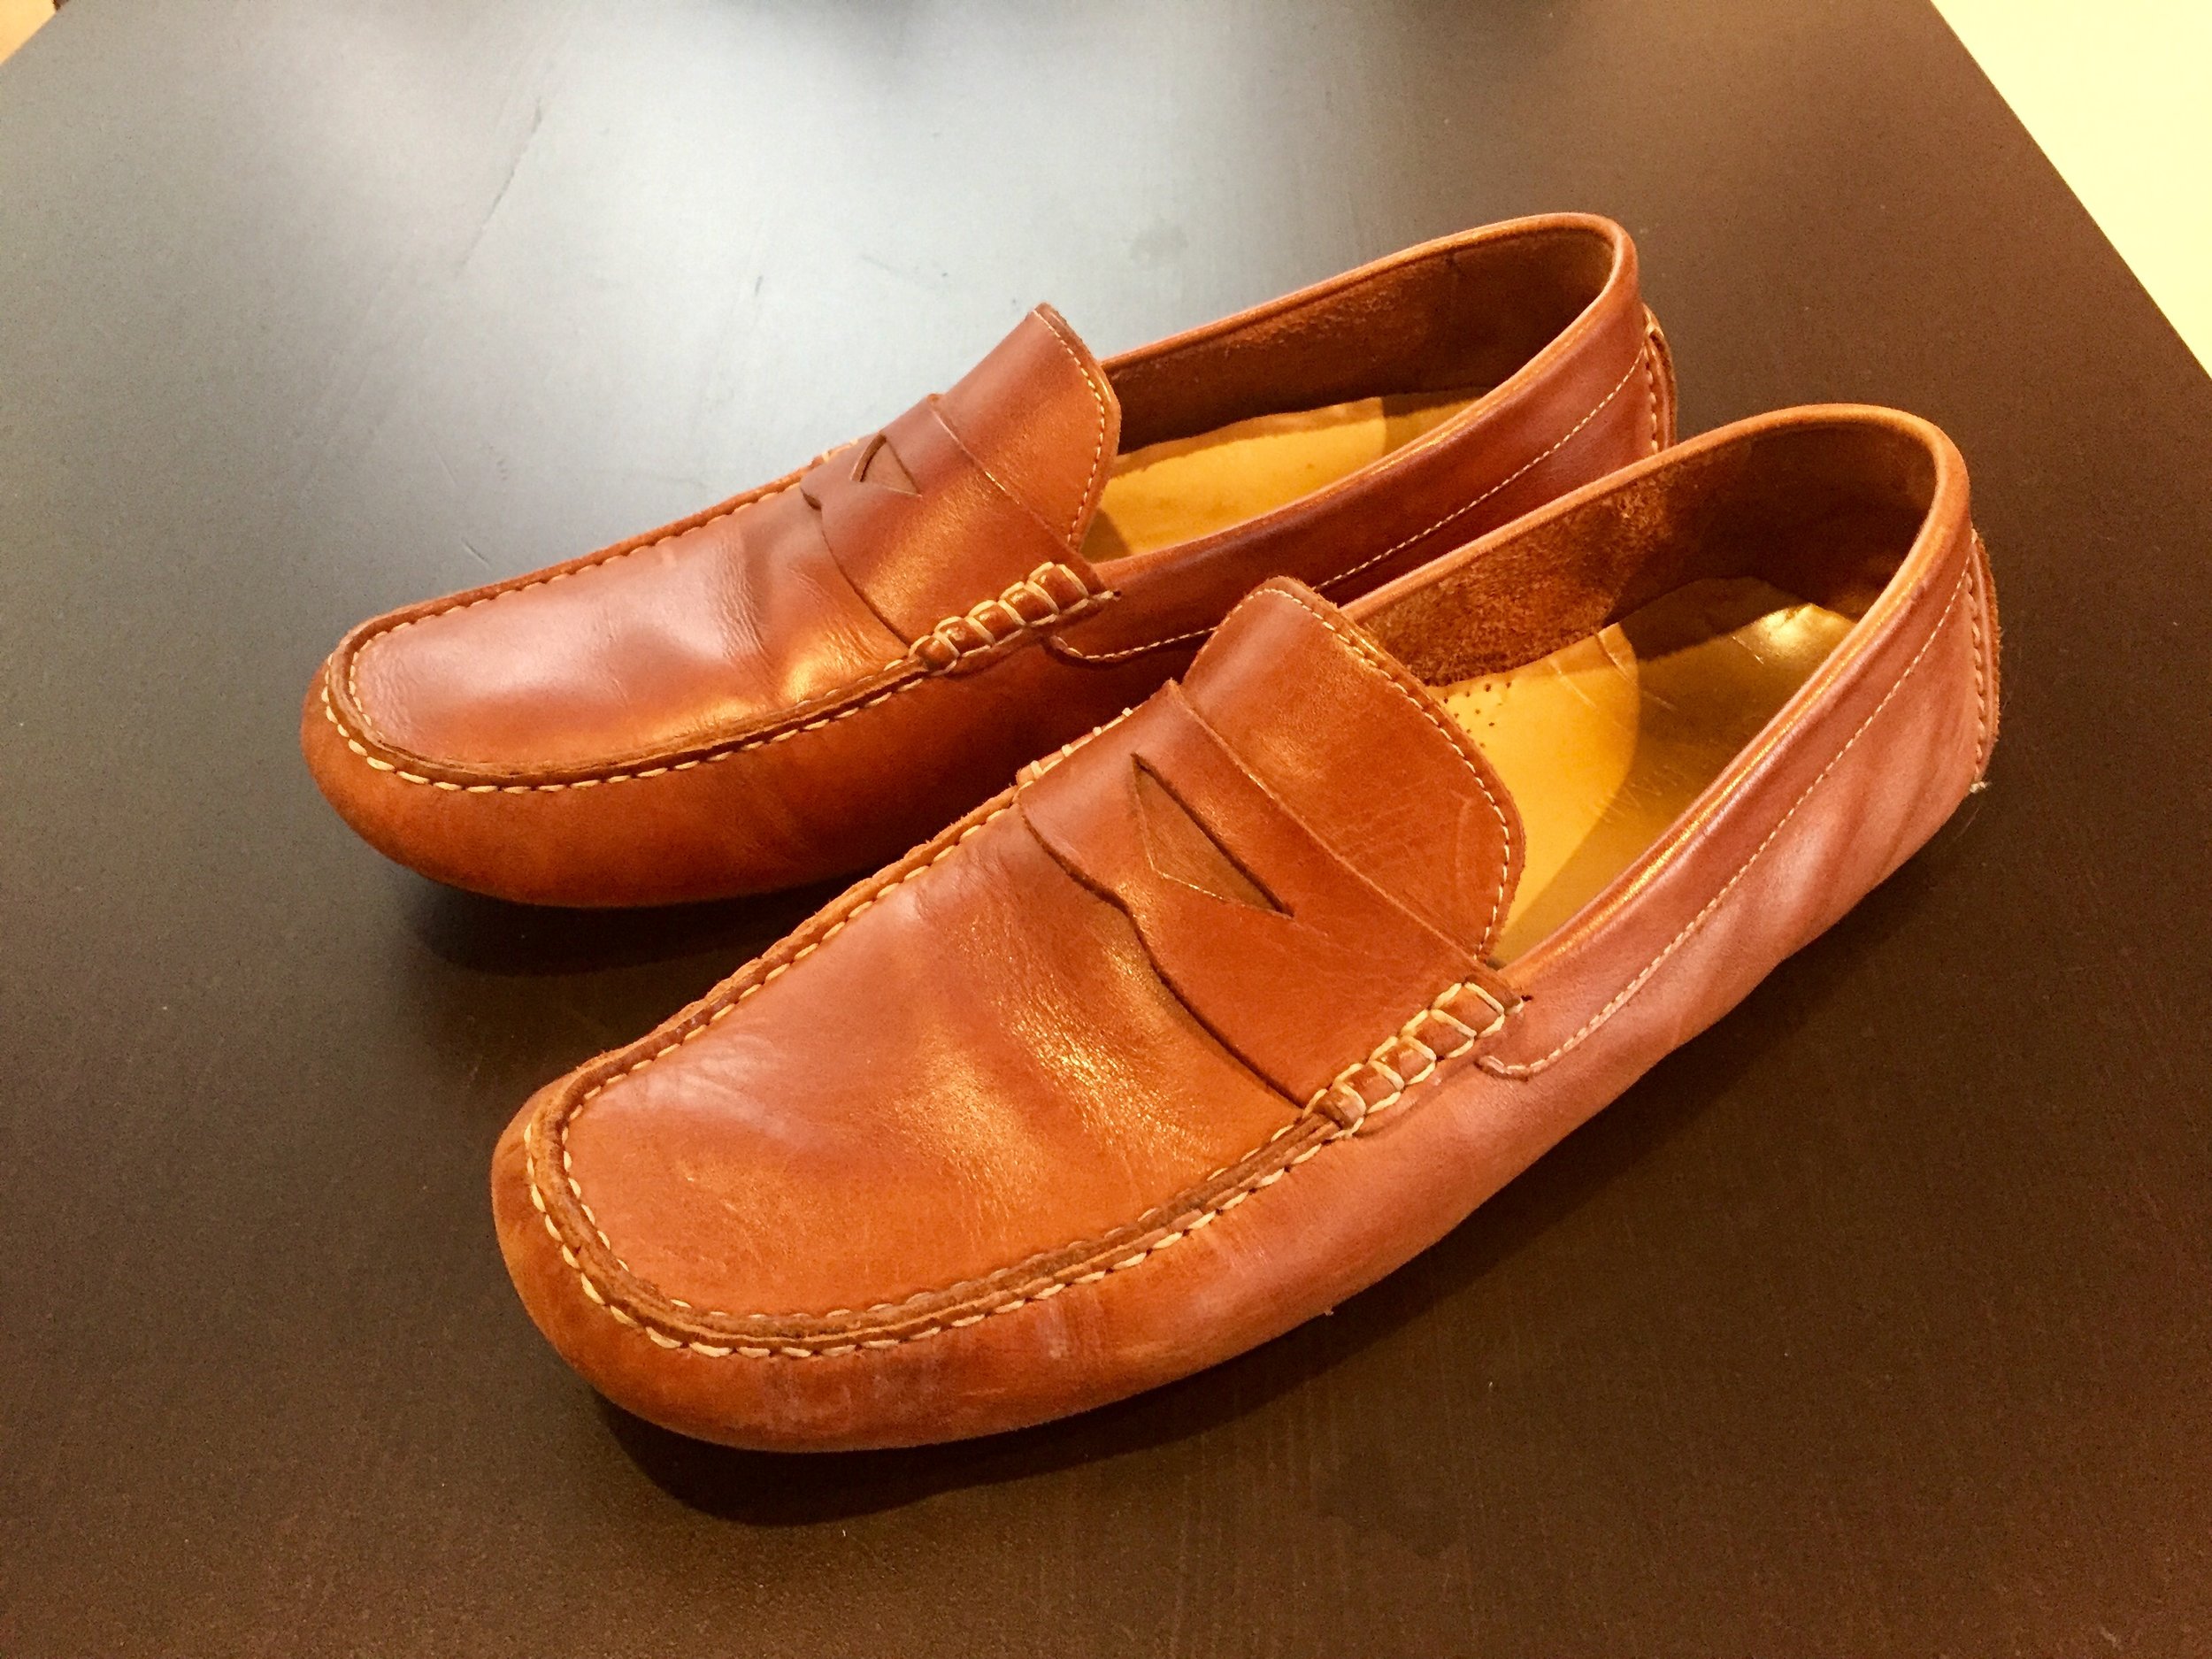 Cole Haan Howland Penny